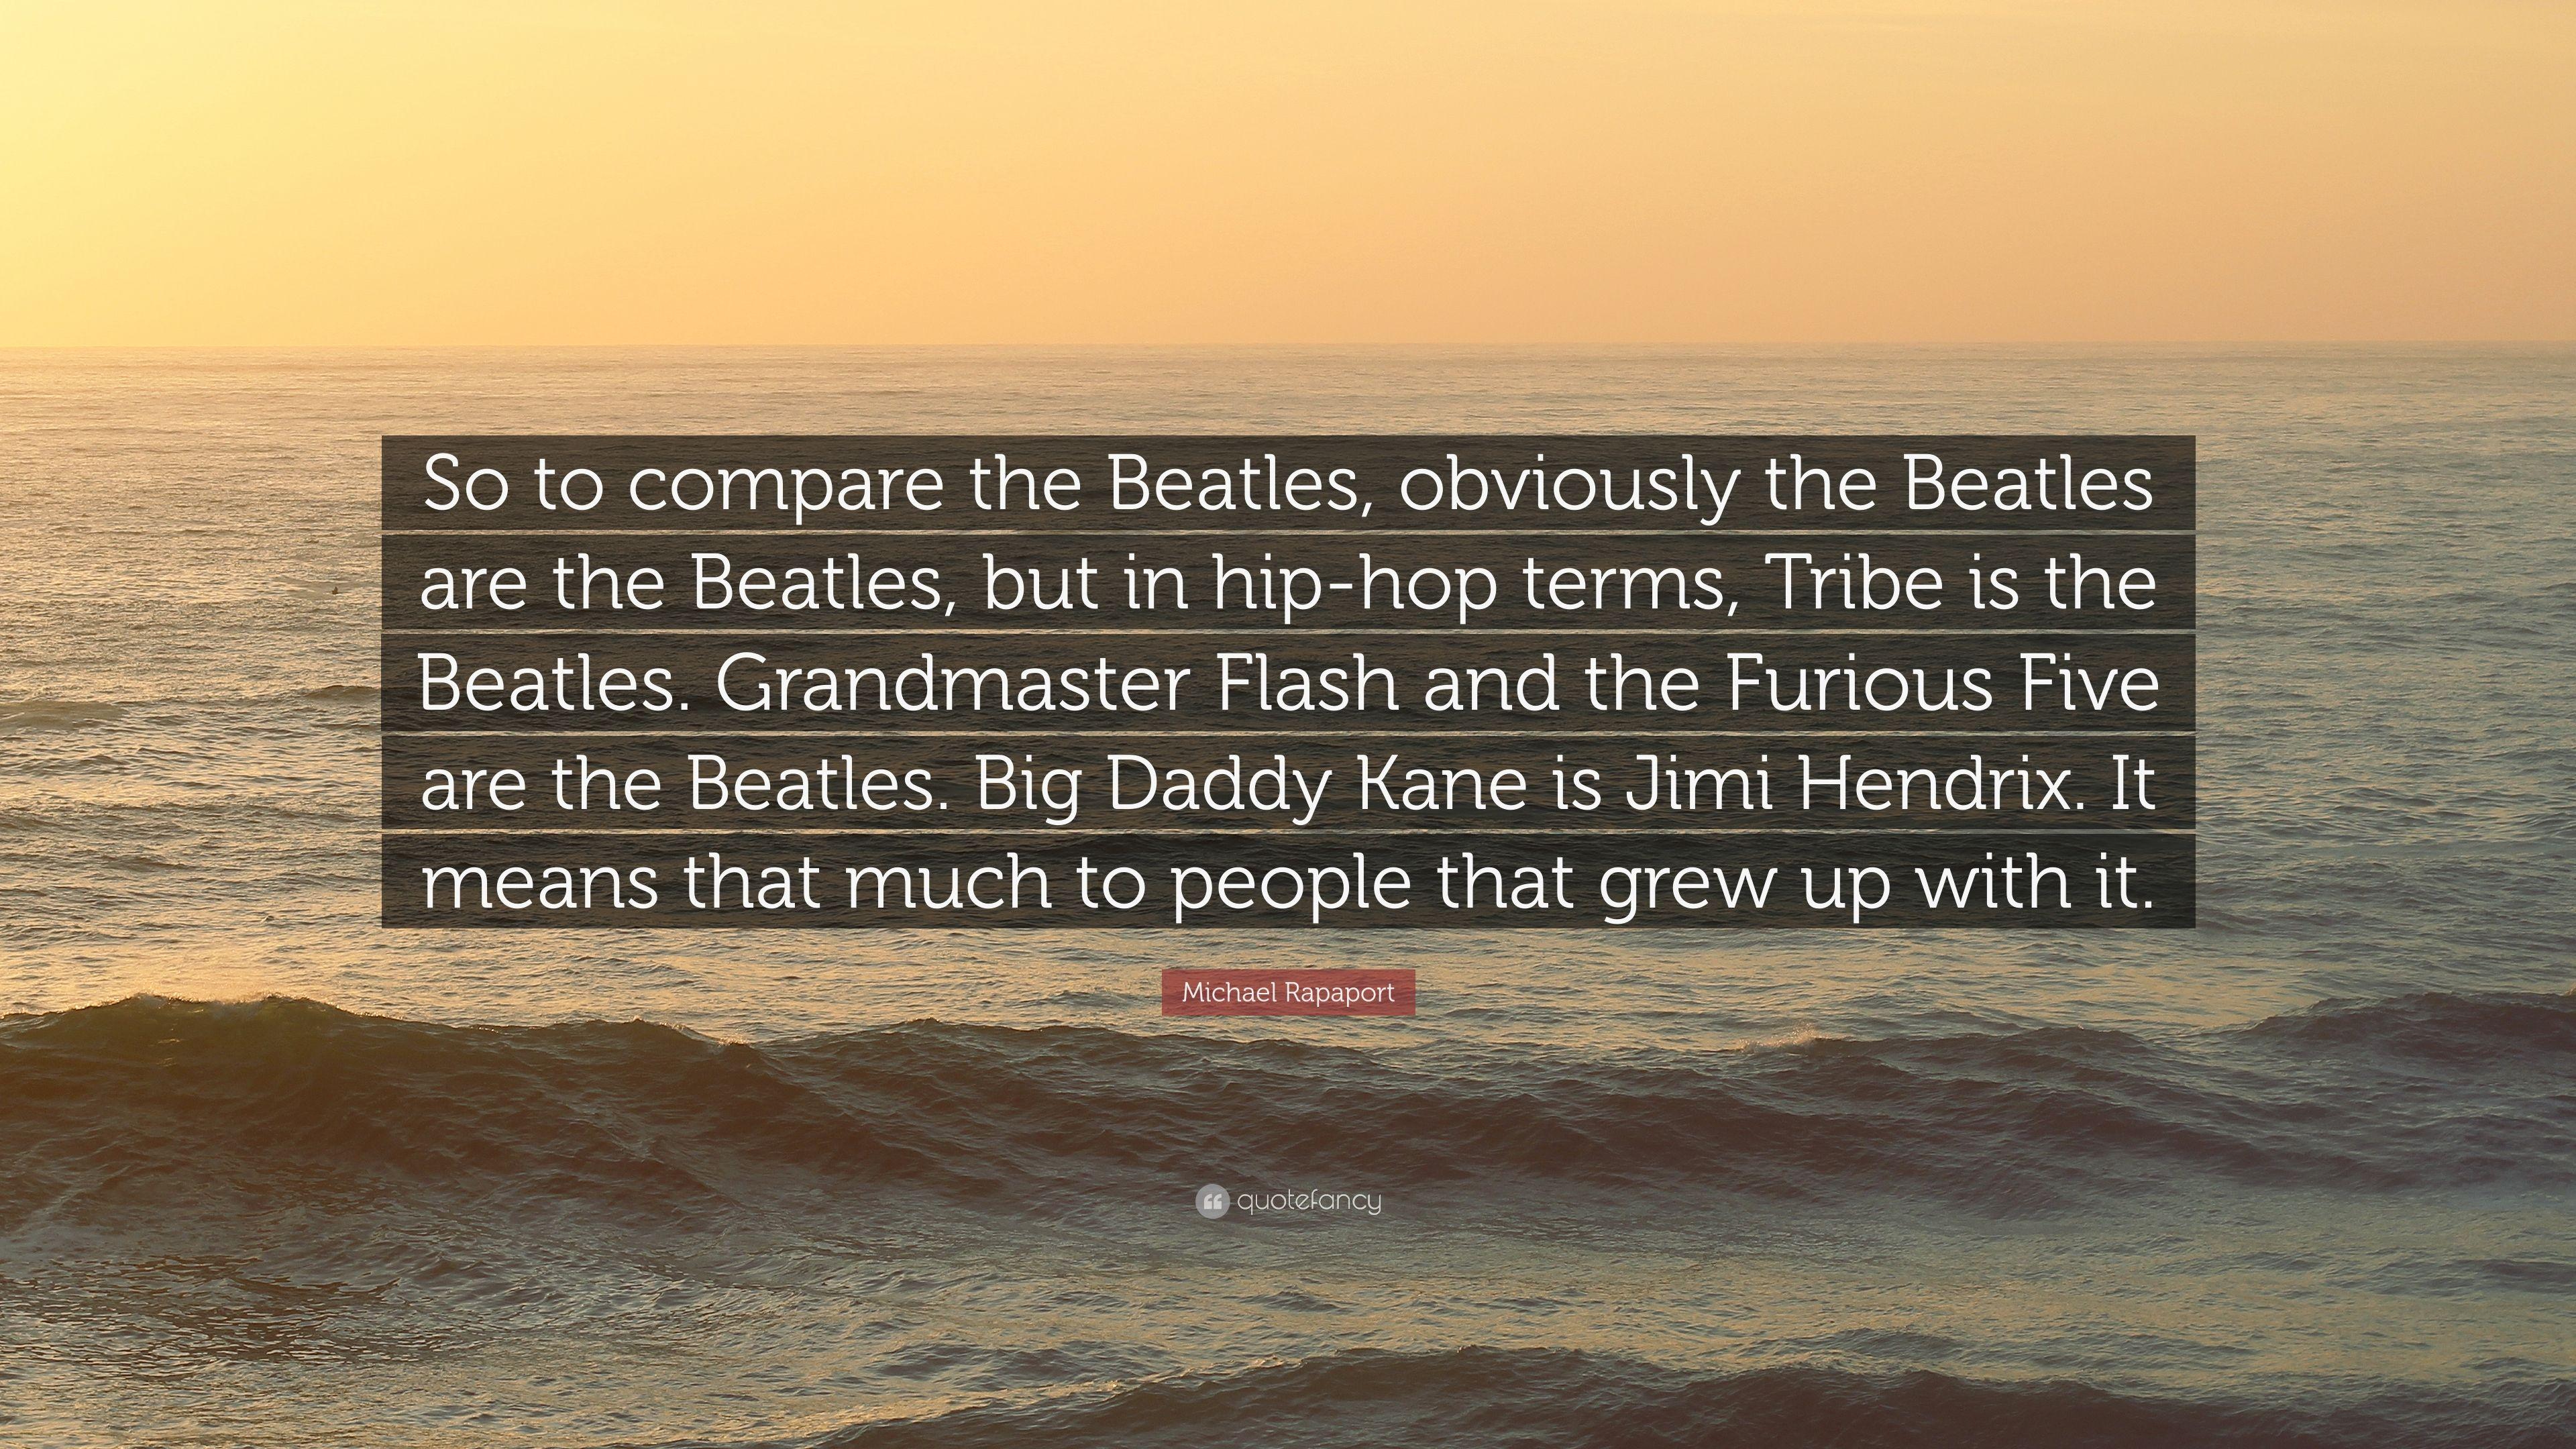 Michael Rapaport Quote: “So to compare the Beatles, obviously